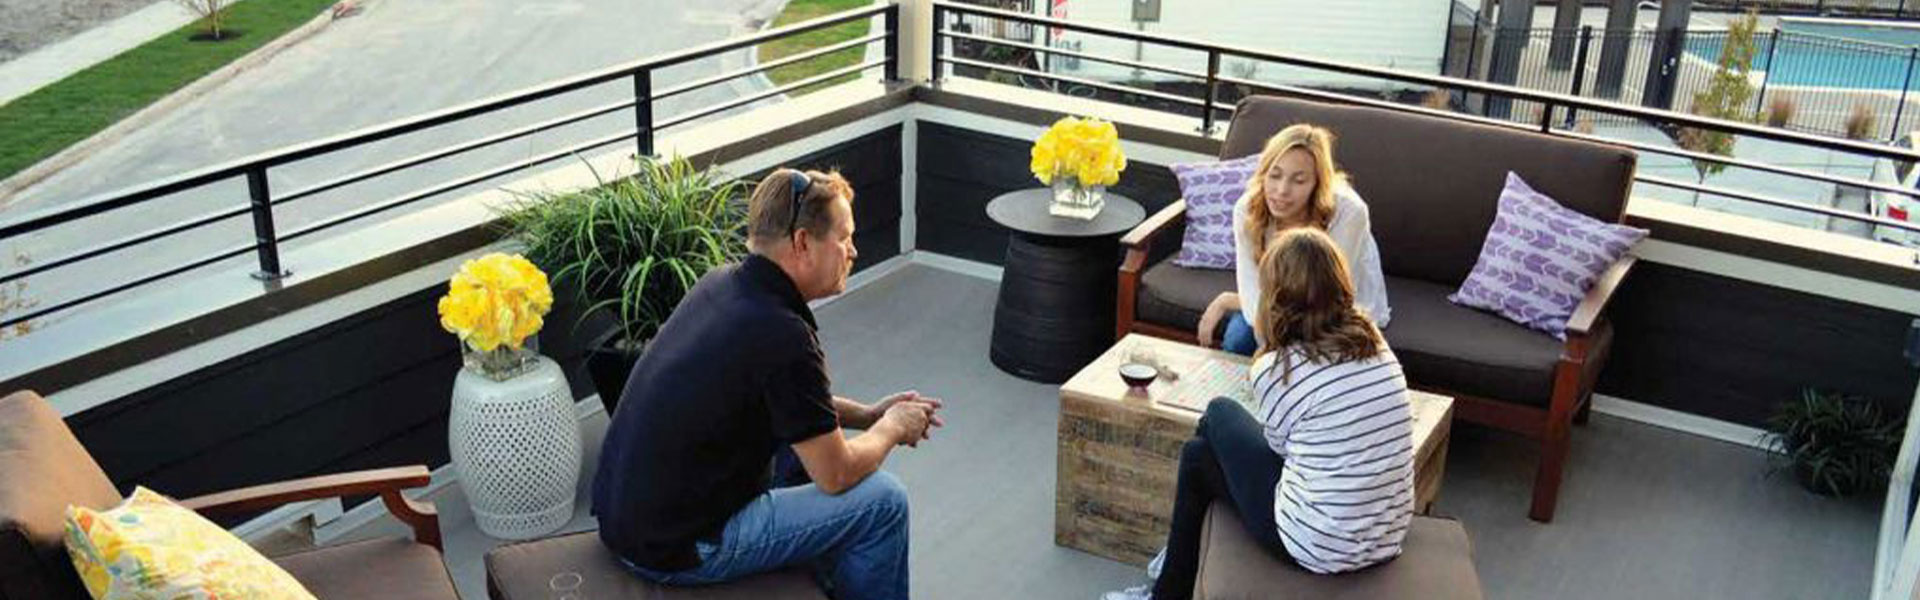 Image showing Duradek products and decking on a rooftop patio